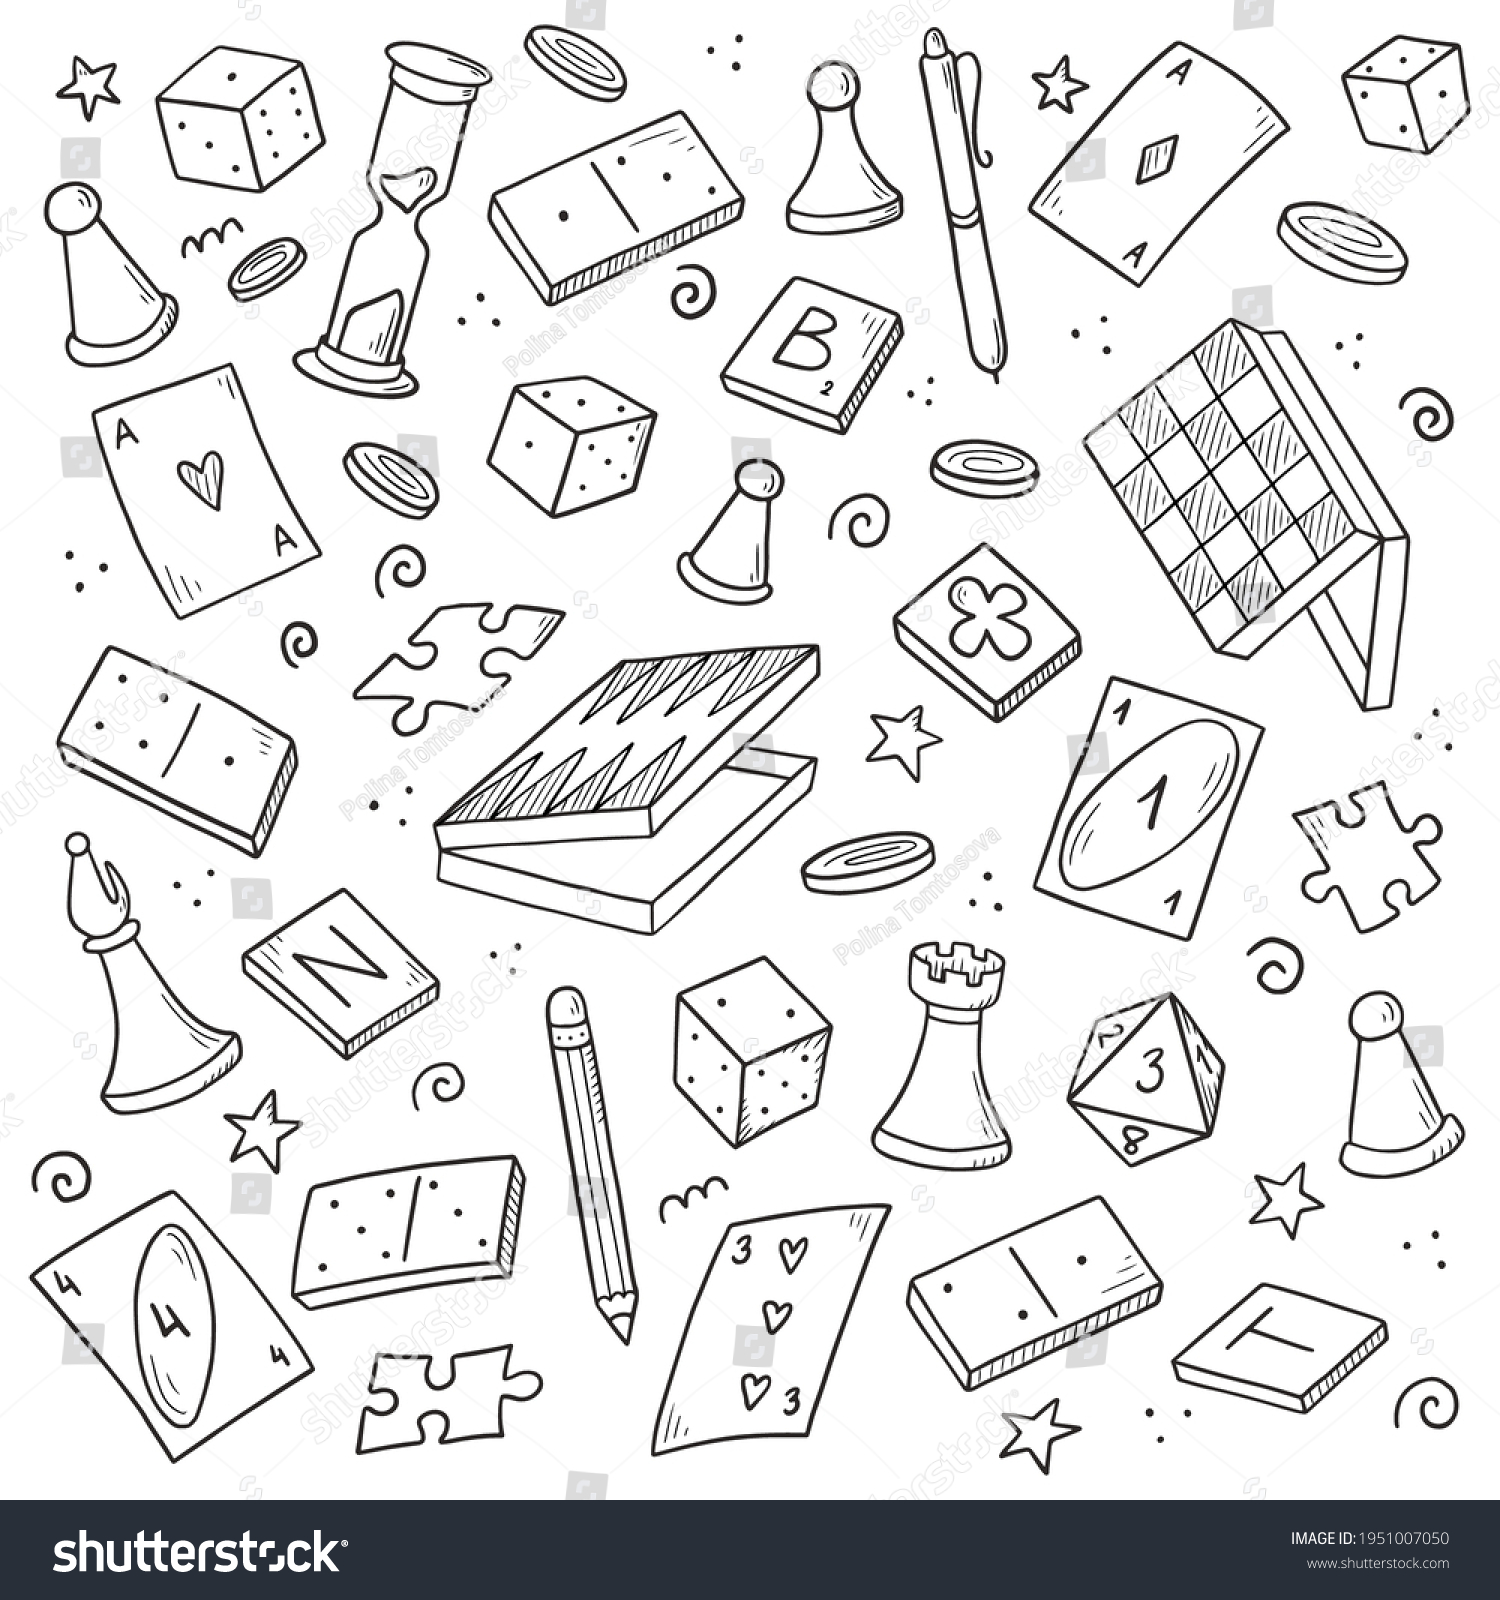 Hand drawn set of board game element, cards, chess, hourglass, chips, dice, dominoes. Doodle sketch style. Isolated vector illustration for board game shop, store, game competition. #1951007050